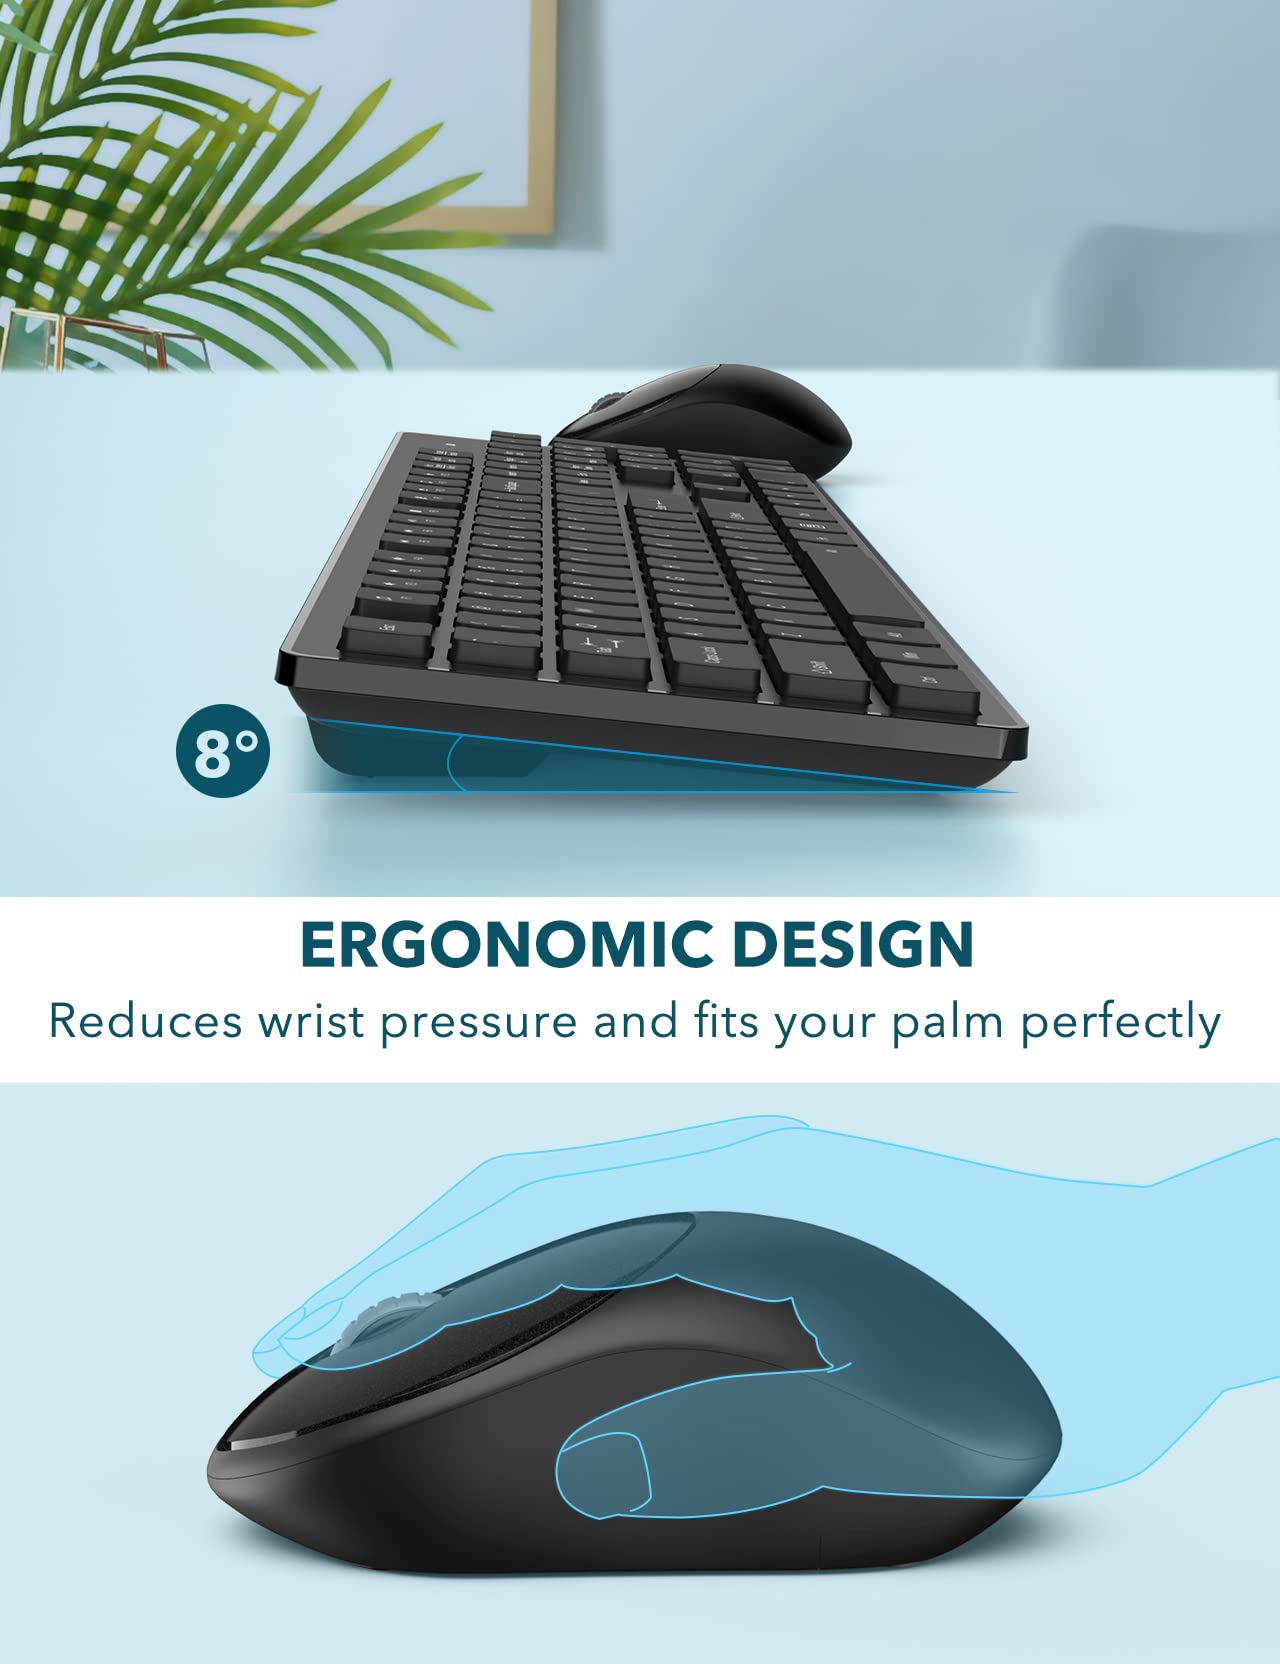 Wireless Keyboard and Mouse, WisFox USB Computer Keyboard with Silent Keys, Long Battery Life, 2.4GHz Full-Size Lag-Free Cordless Combo for PC Laptops Windows Mac Chrome OS (Black)